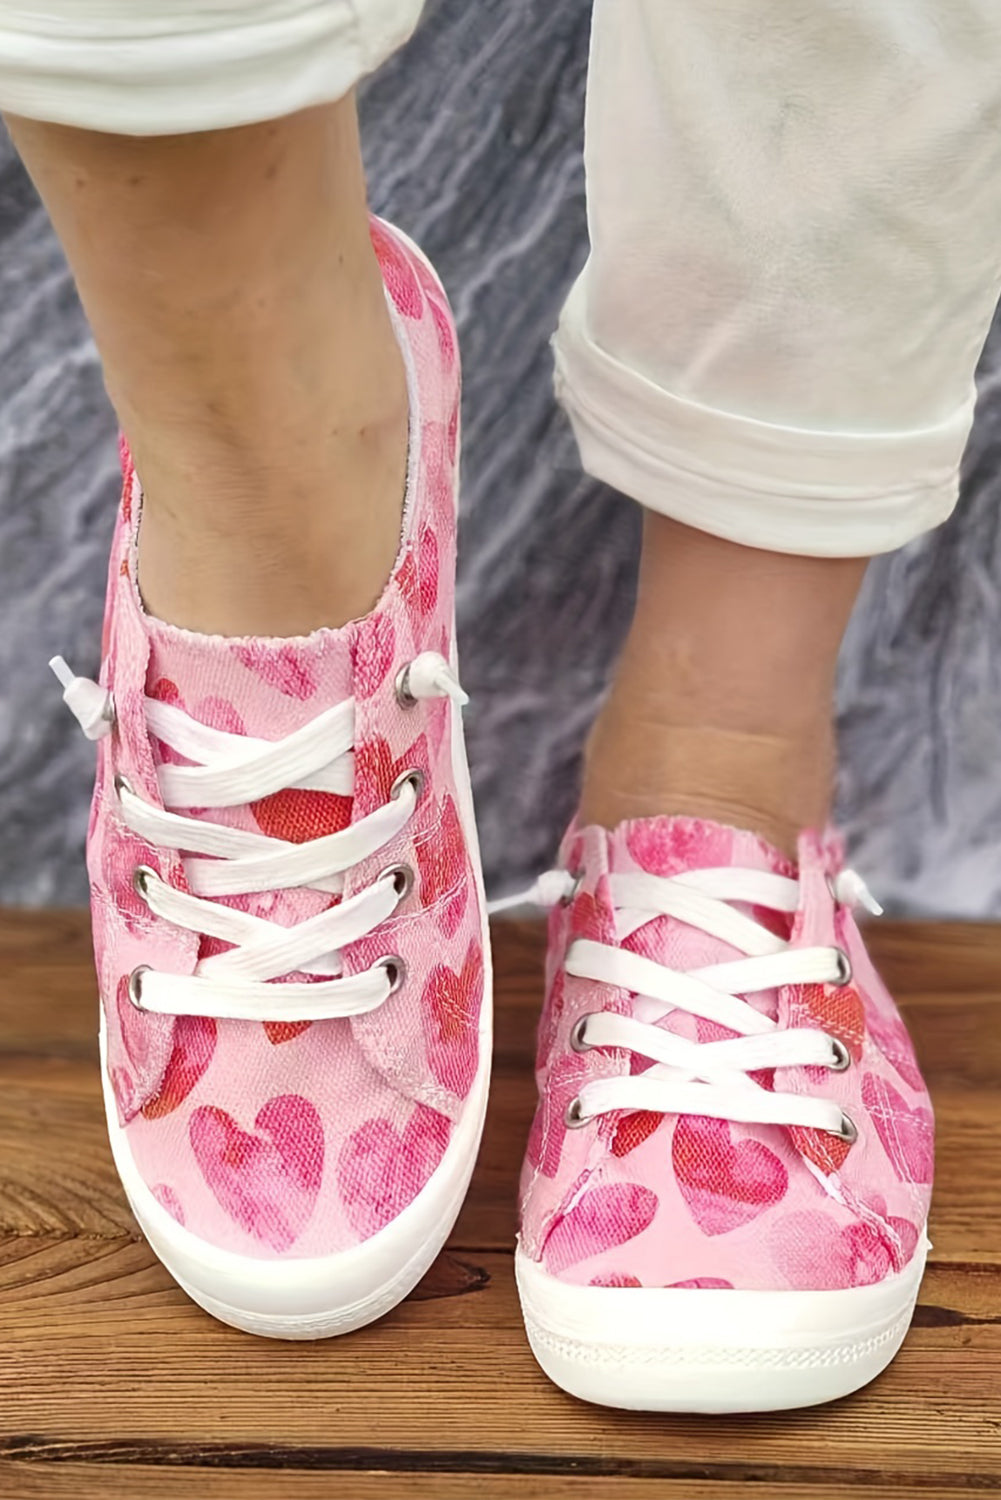 Strawberry Pink Heart Shaped Criss Cross Slip On Canvas Shoes Women's Shoes JT's Designer Fashion